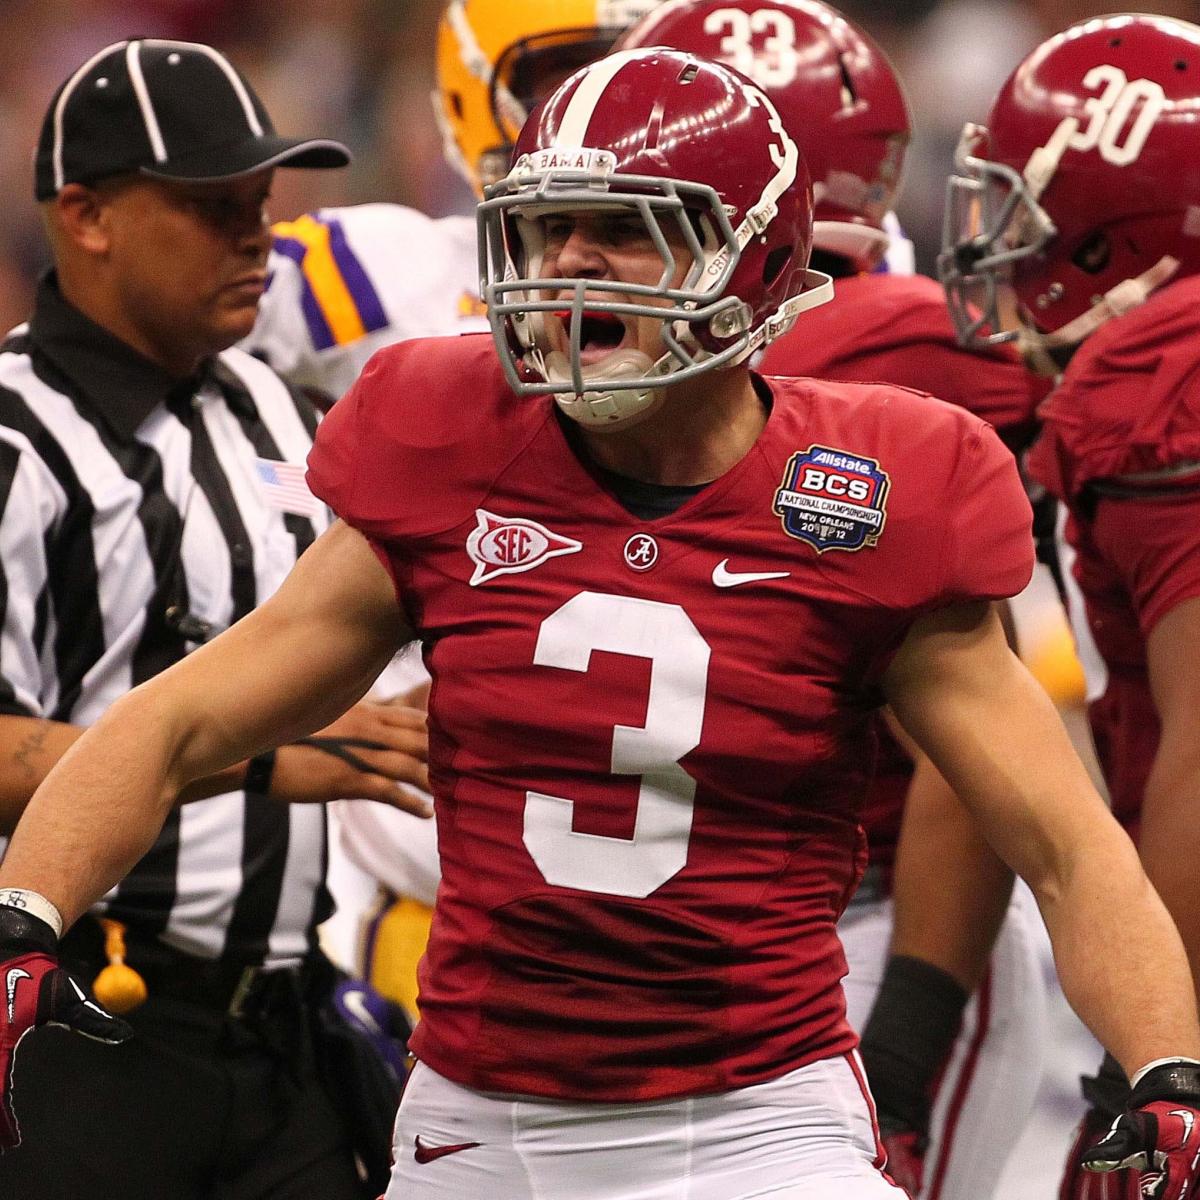 Alabama Football 'Bama Depth Chart Released with a Few Surprises